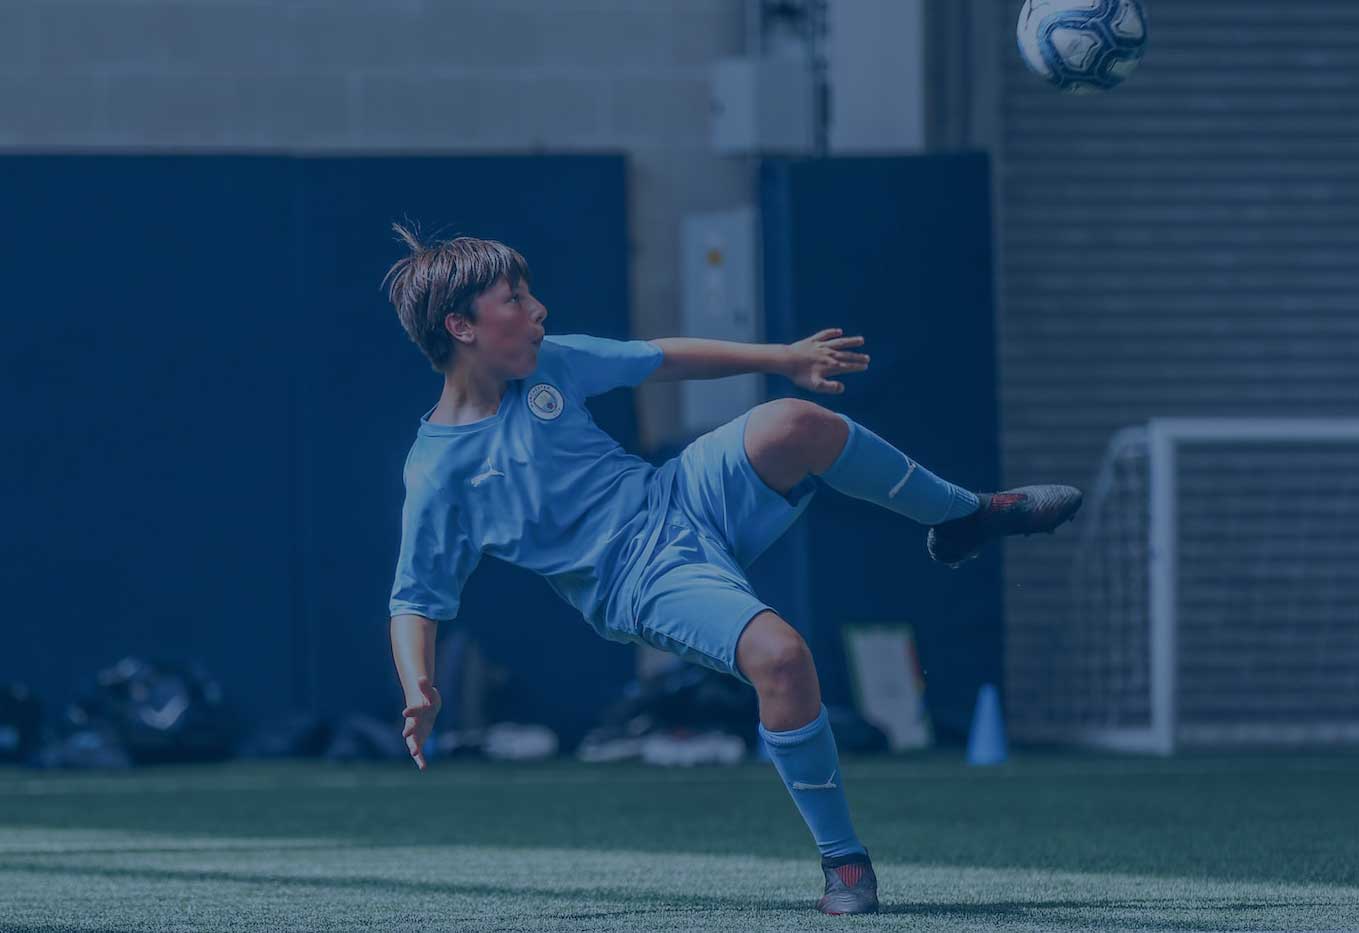 A young boy kicking a football. He has brown hair and is wearing a Man City Football School kit.